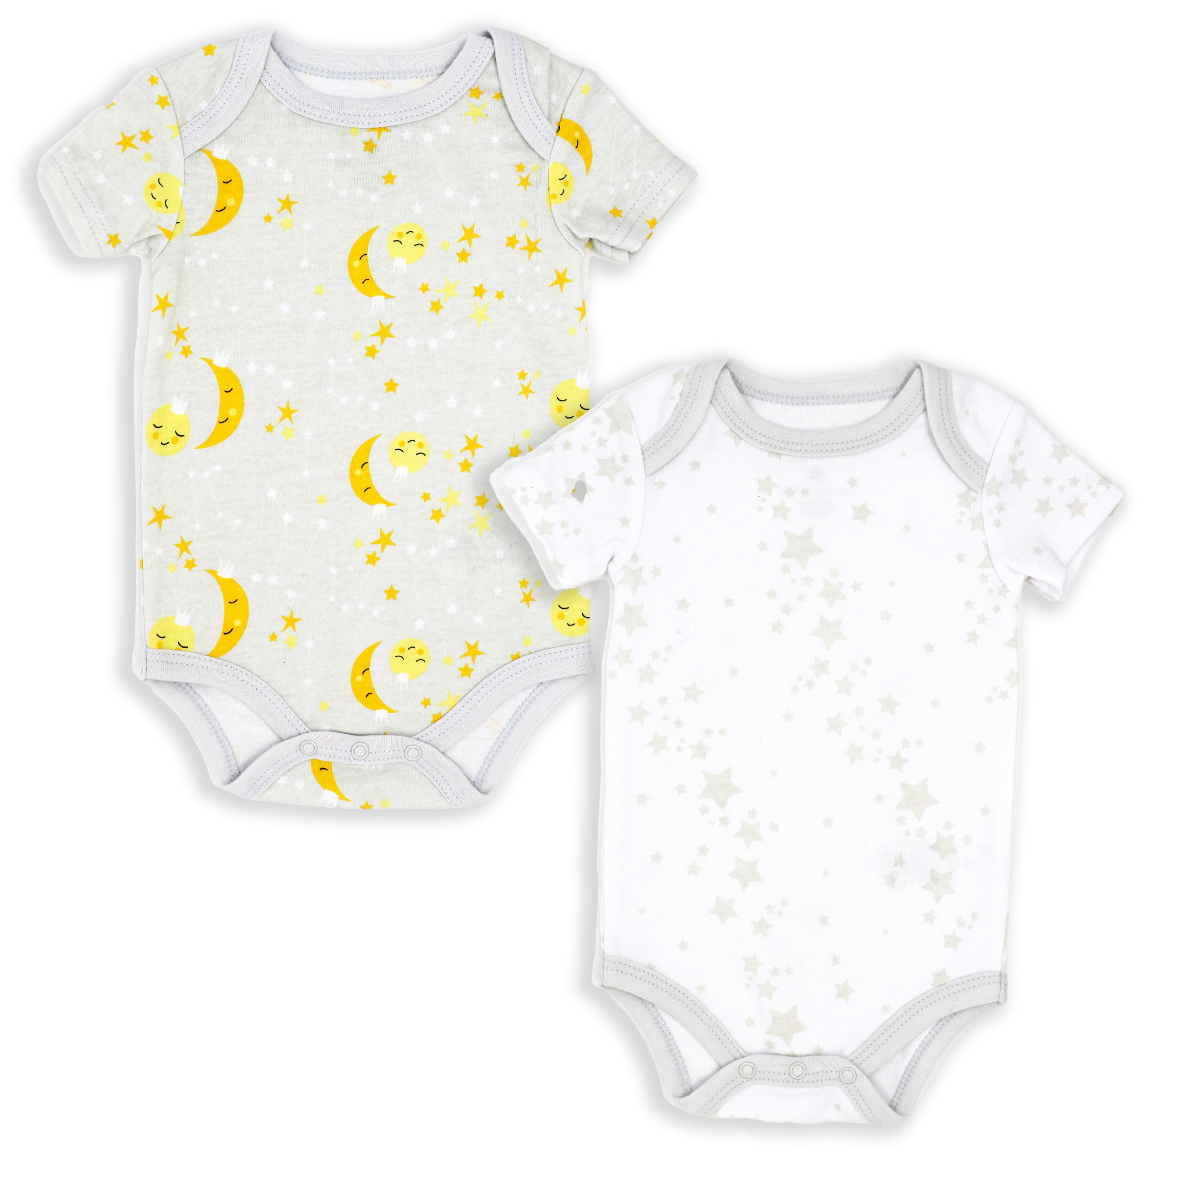 Baby's Galaxy Coverall Bodysuit Set - ittybittybubba